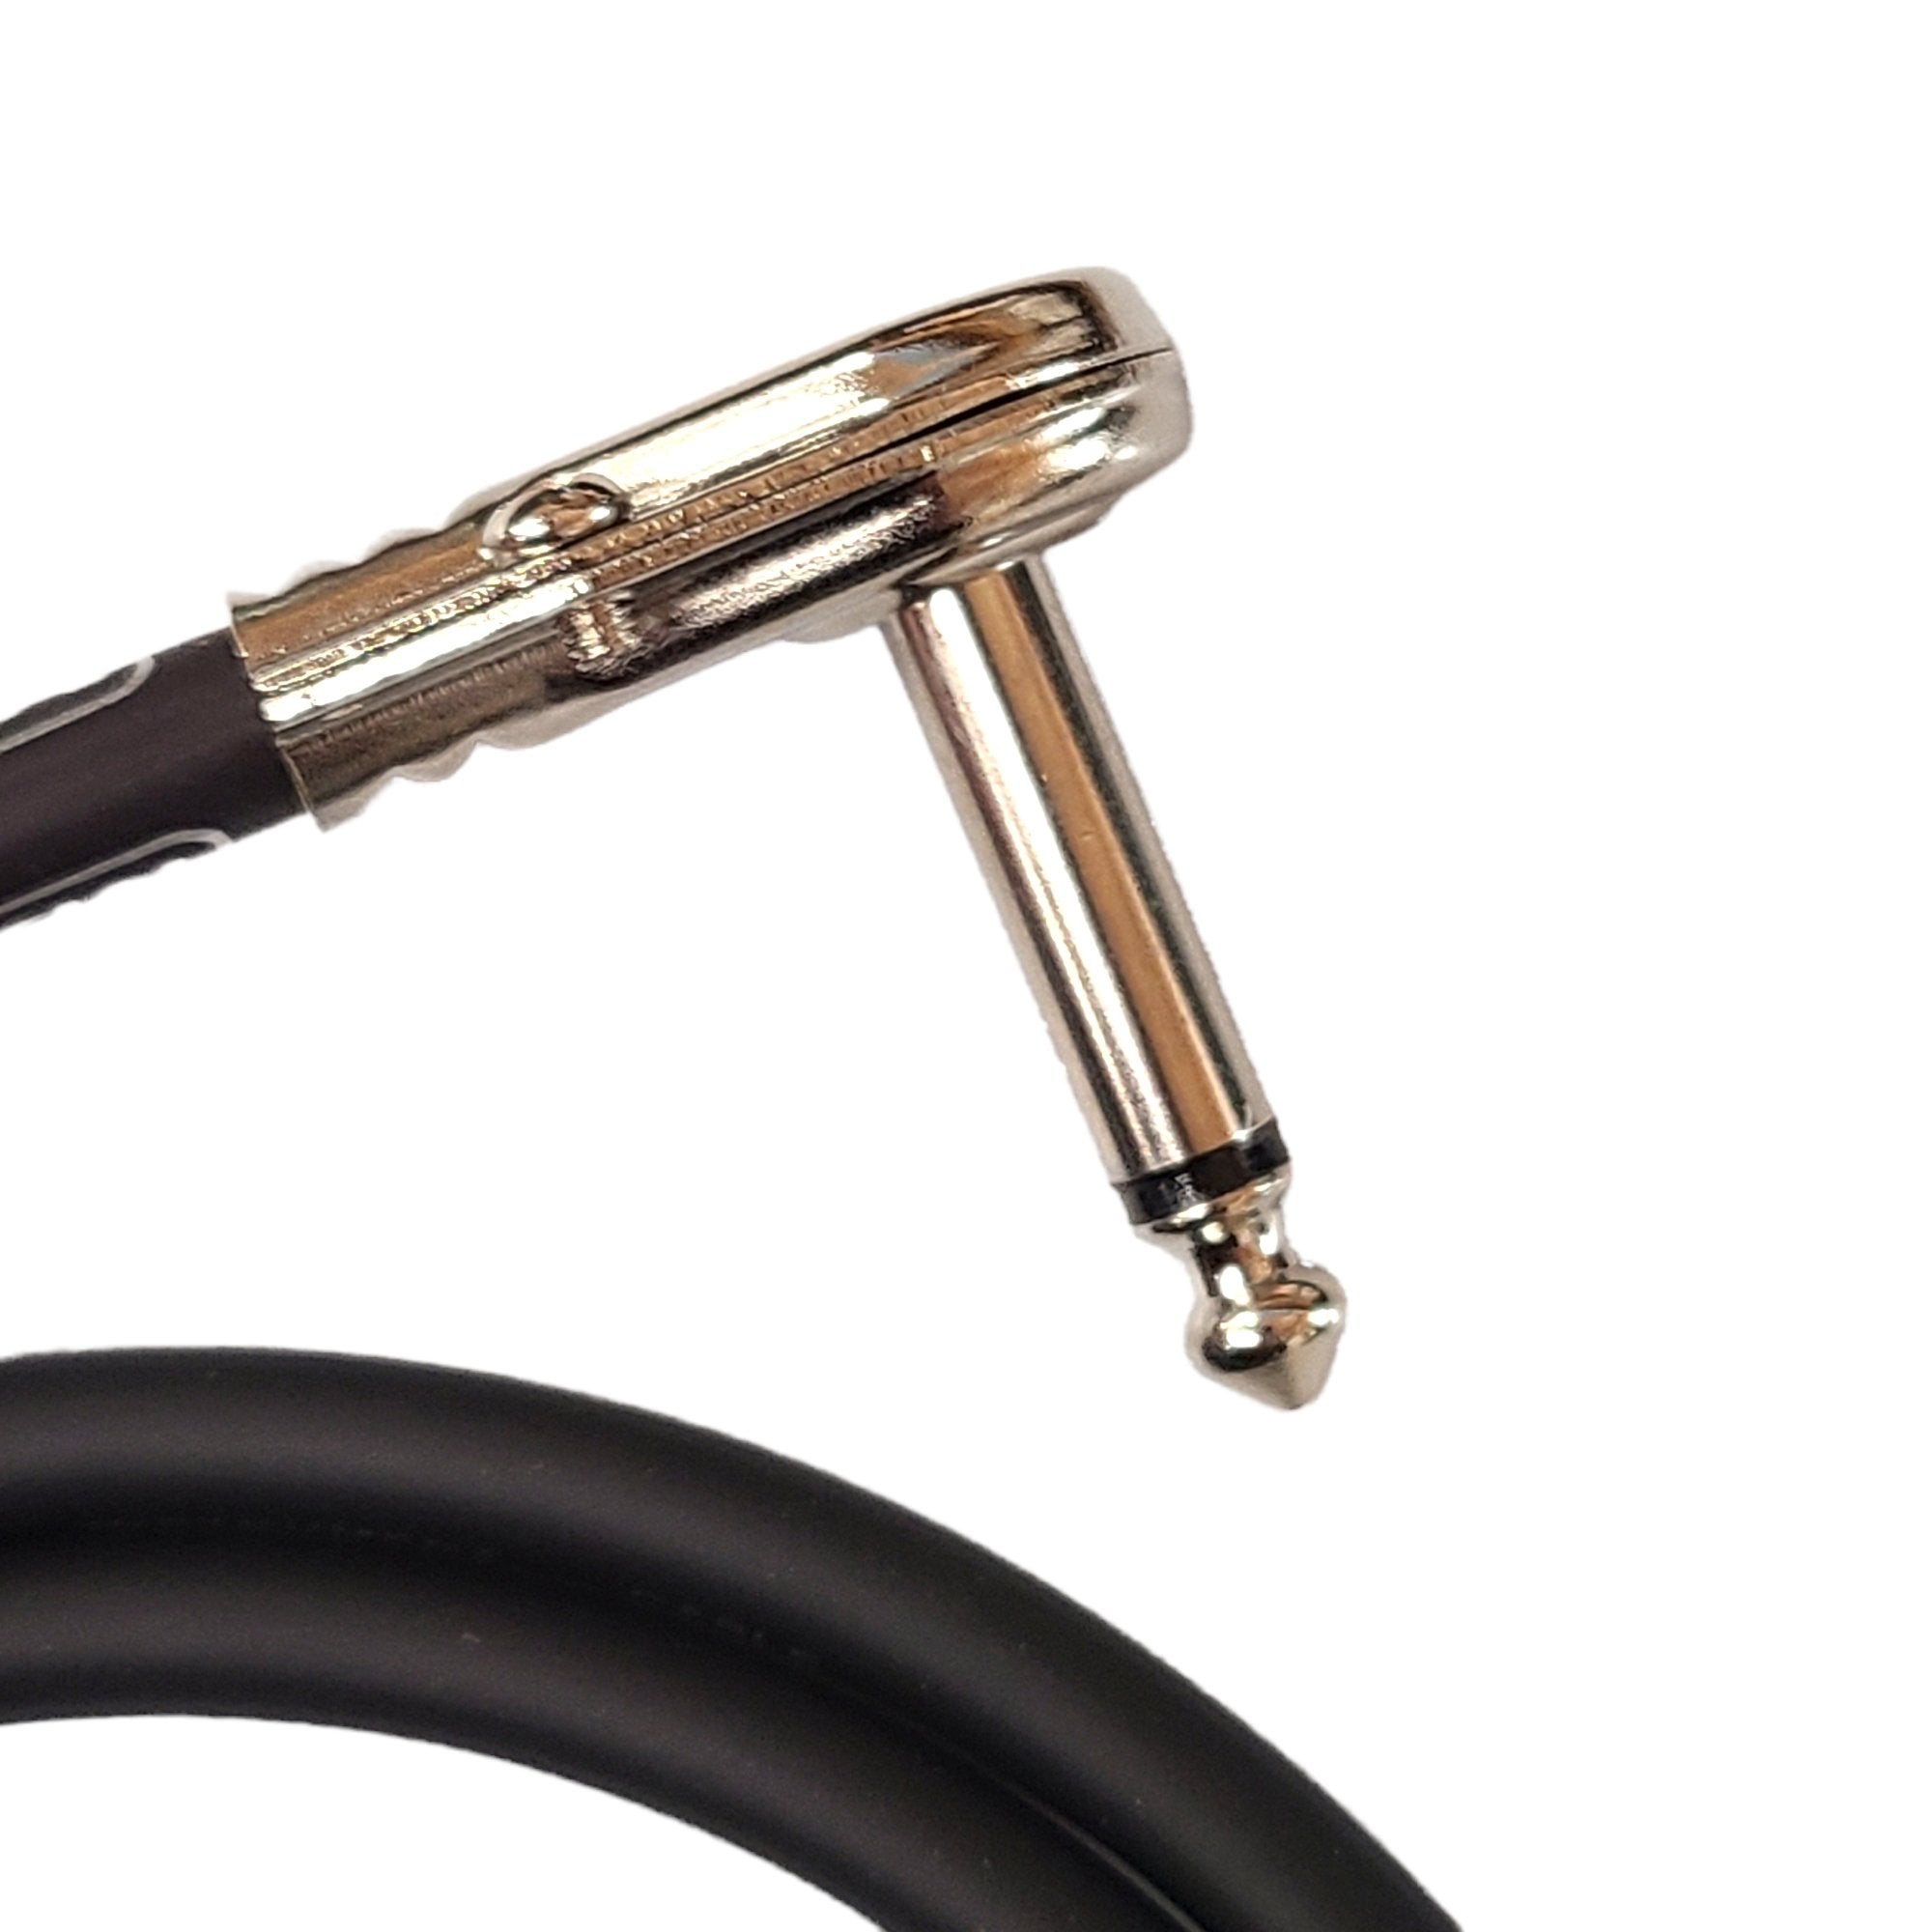 MXR DCP3 Pedalboard Patch Cable, 3ft